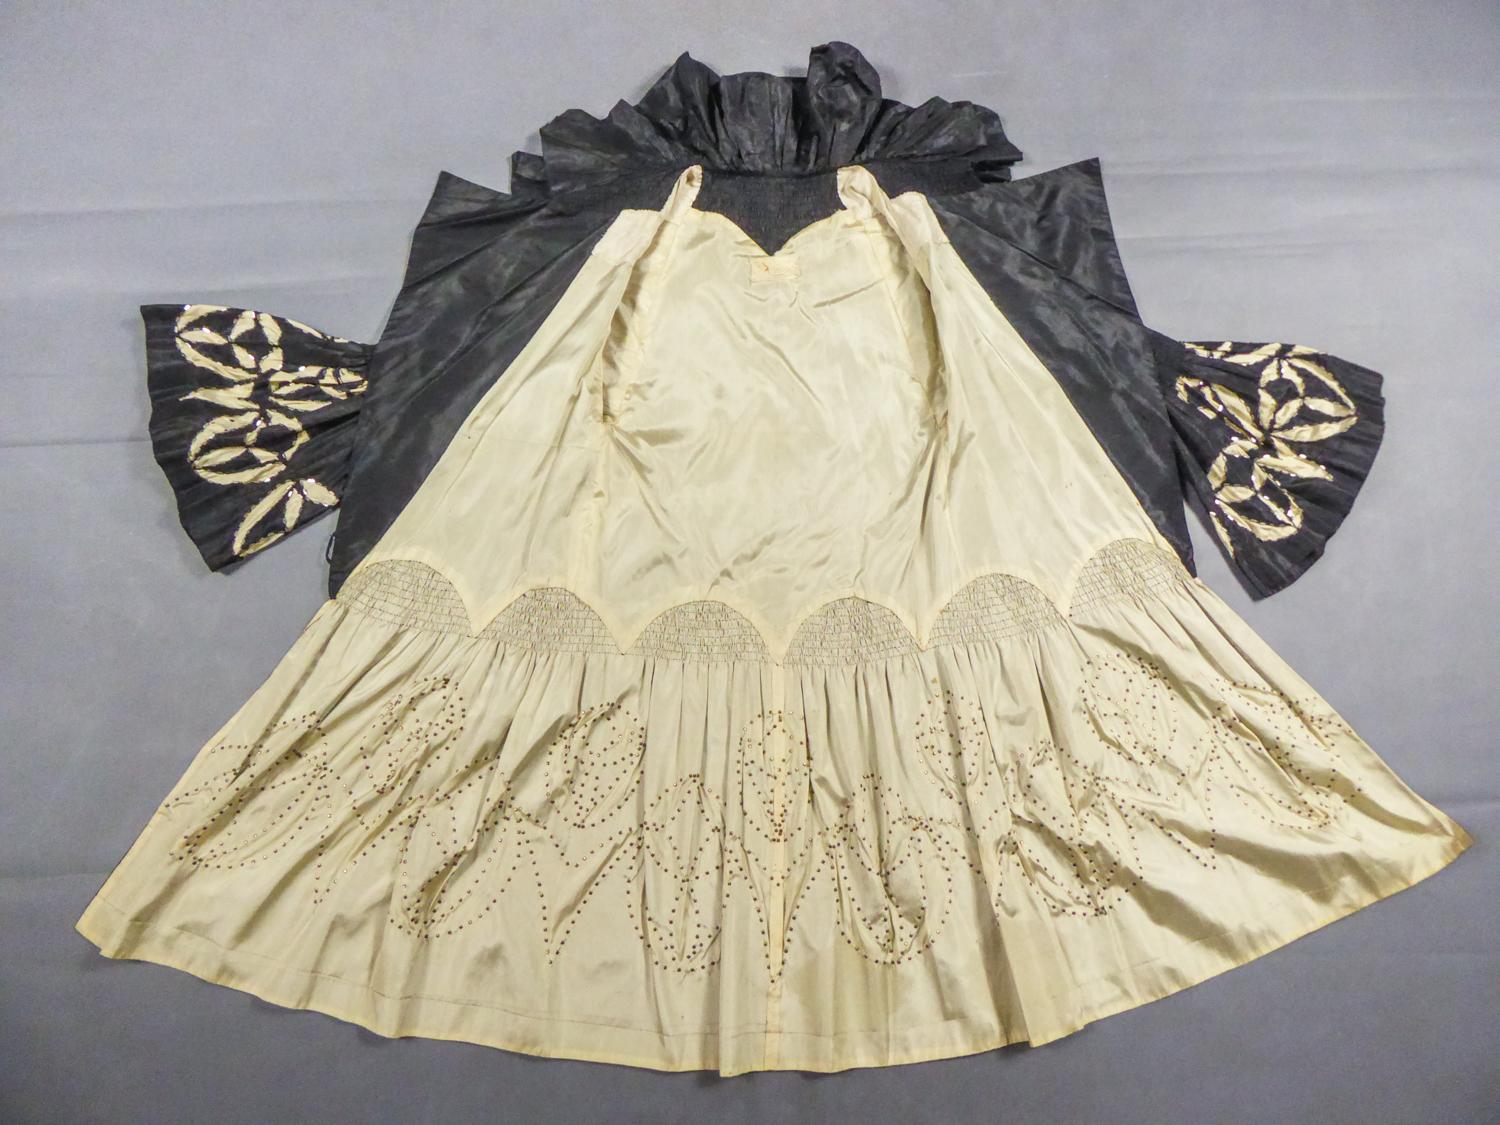 Circa 1925/1929

Paris or London

Dramatic opera coat in black silk taffeta and cream from the famous Maison de Couture Redfern, based in Paris, London and New York, dating from the late 1920s. Large cross-section cut (button missing) and large